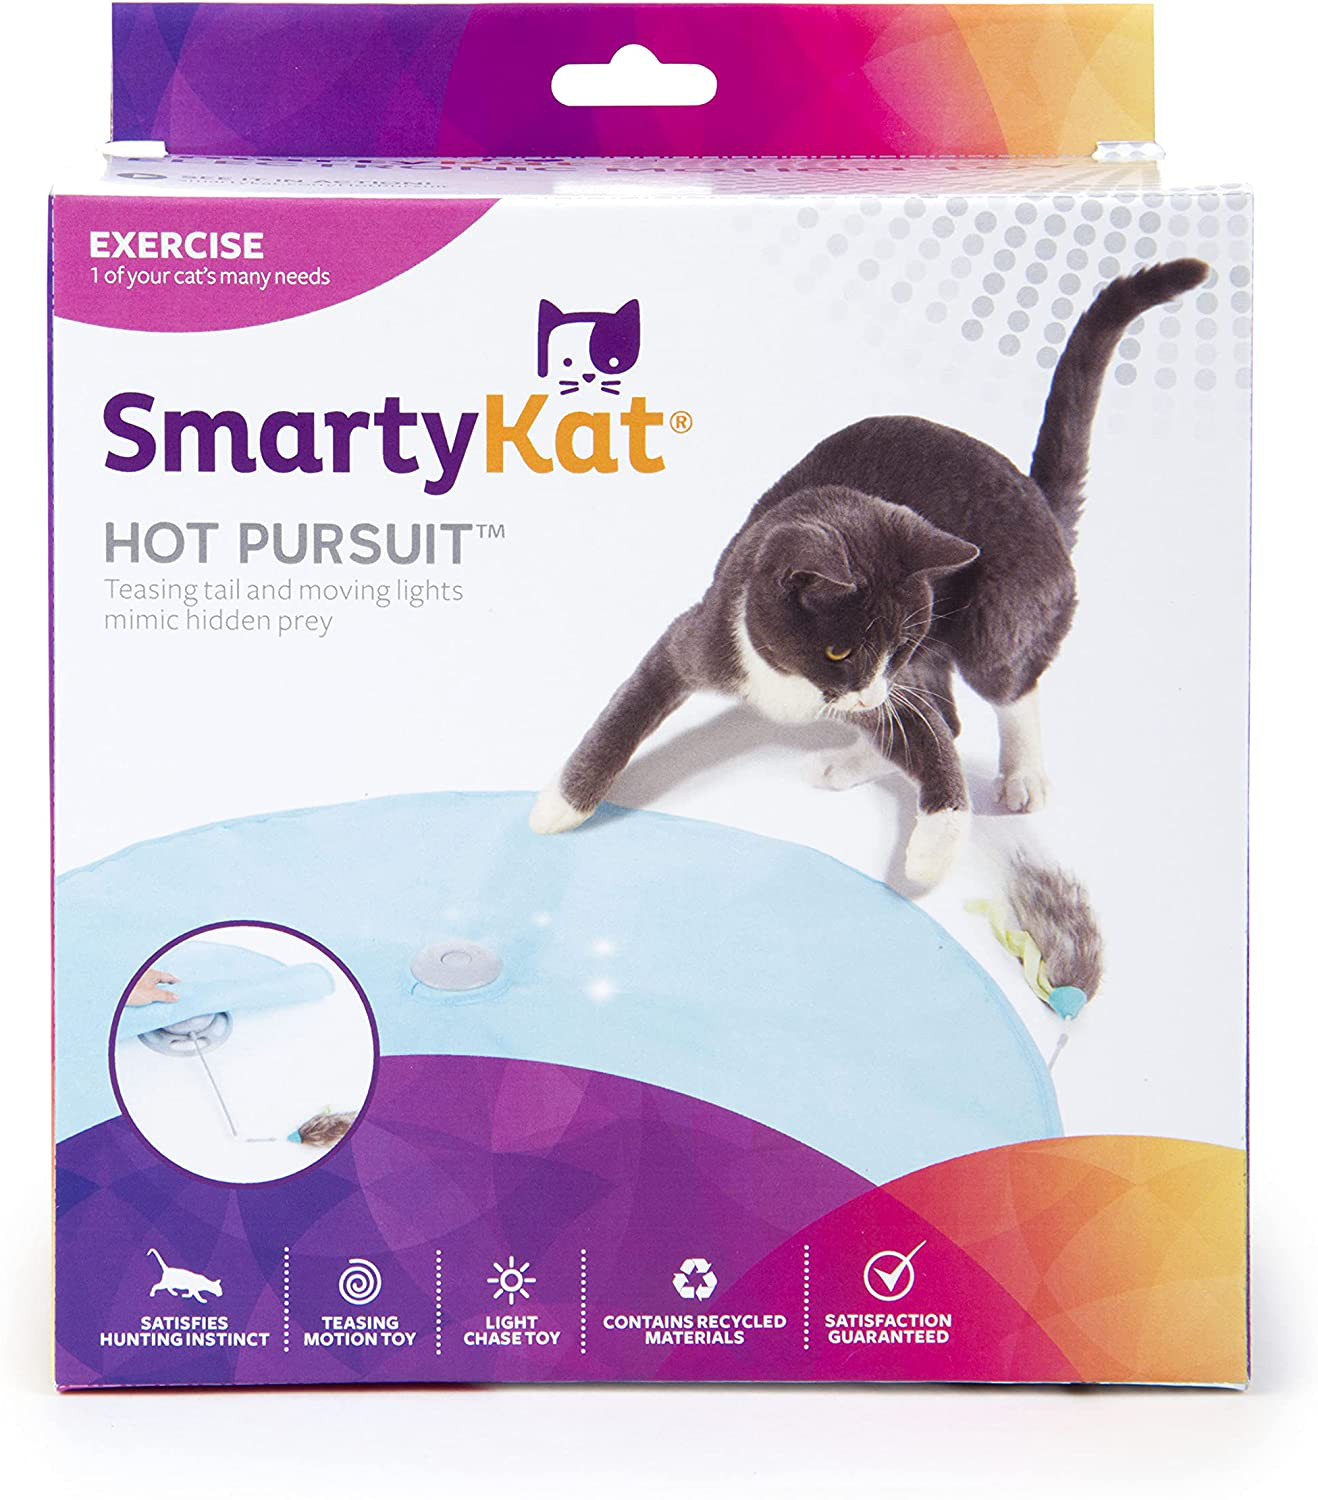 Smartykat Hot Pursuit, Electronic Concealed Motion Cat Toy, Interactive Spinning Feathered Wand, 2 Speed Controls & Moving Lights, Battery Powered Animals & Pet Supplies > Pet Supplies > Dog Supplies > Dog Treadmills Quaker Pet Group   